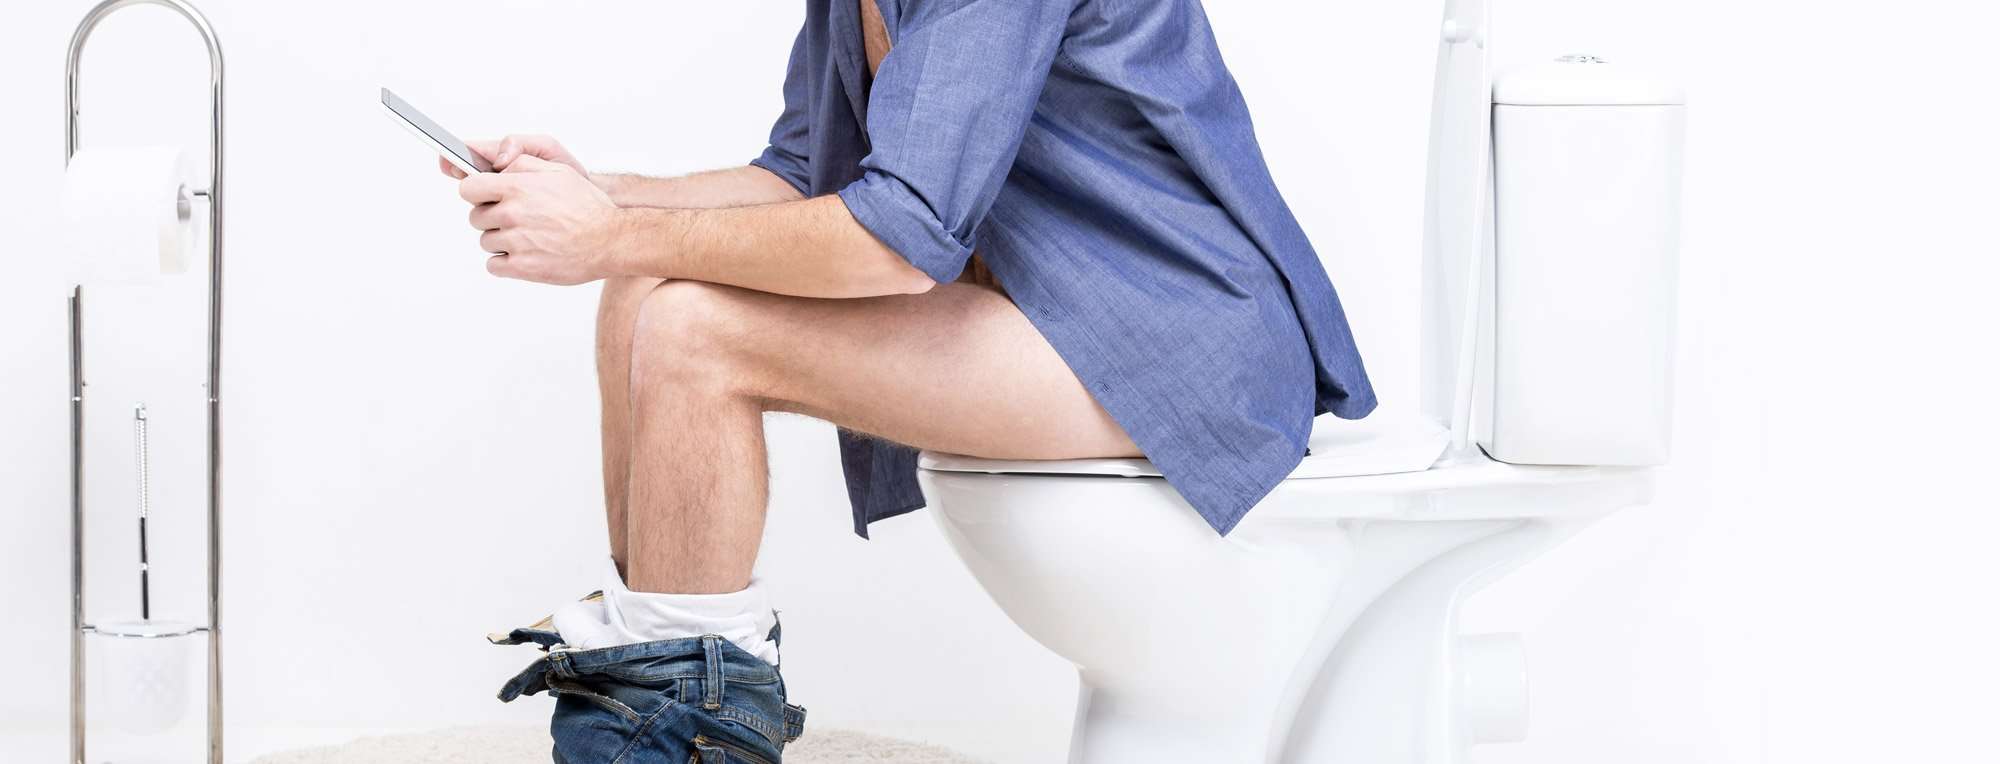 image for Inactive Brits spend twice as long on toilet per week as they do exercising